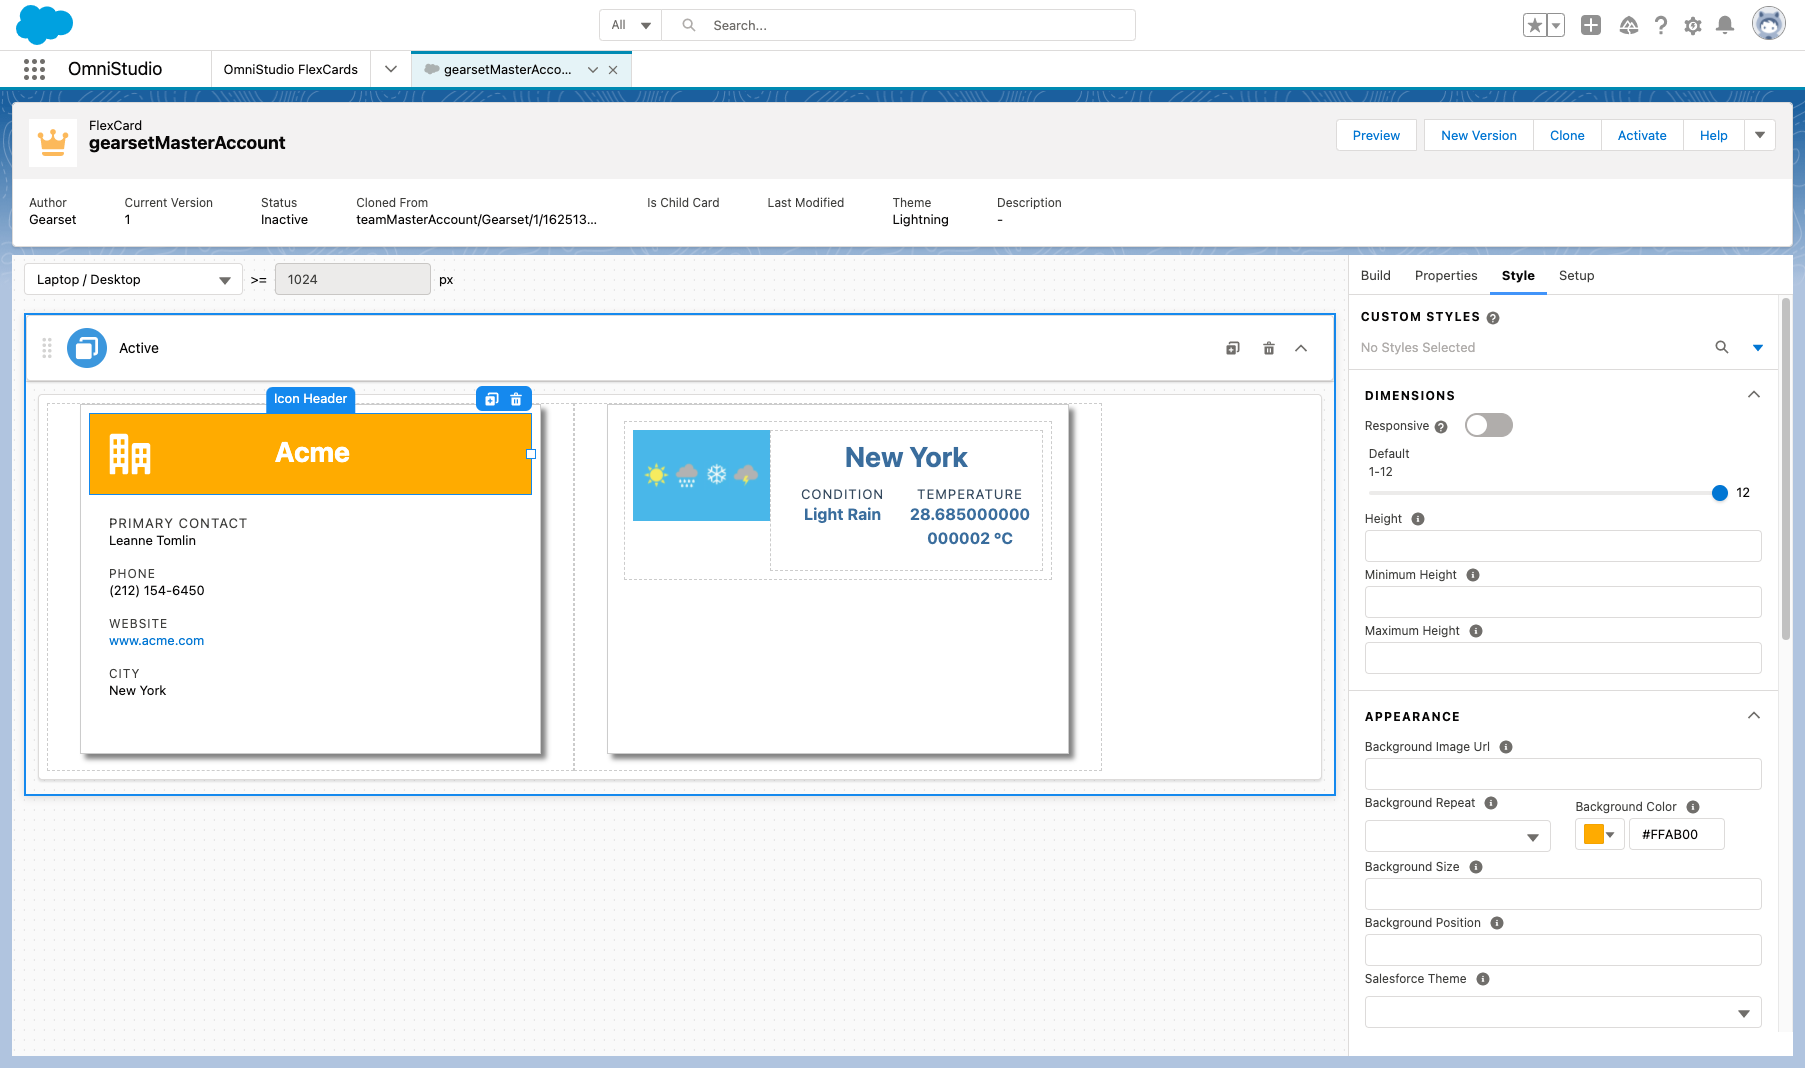 Change the background color of a FlexCard in OmniStudio within our Salesforce developer org